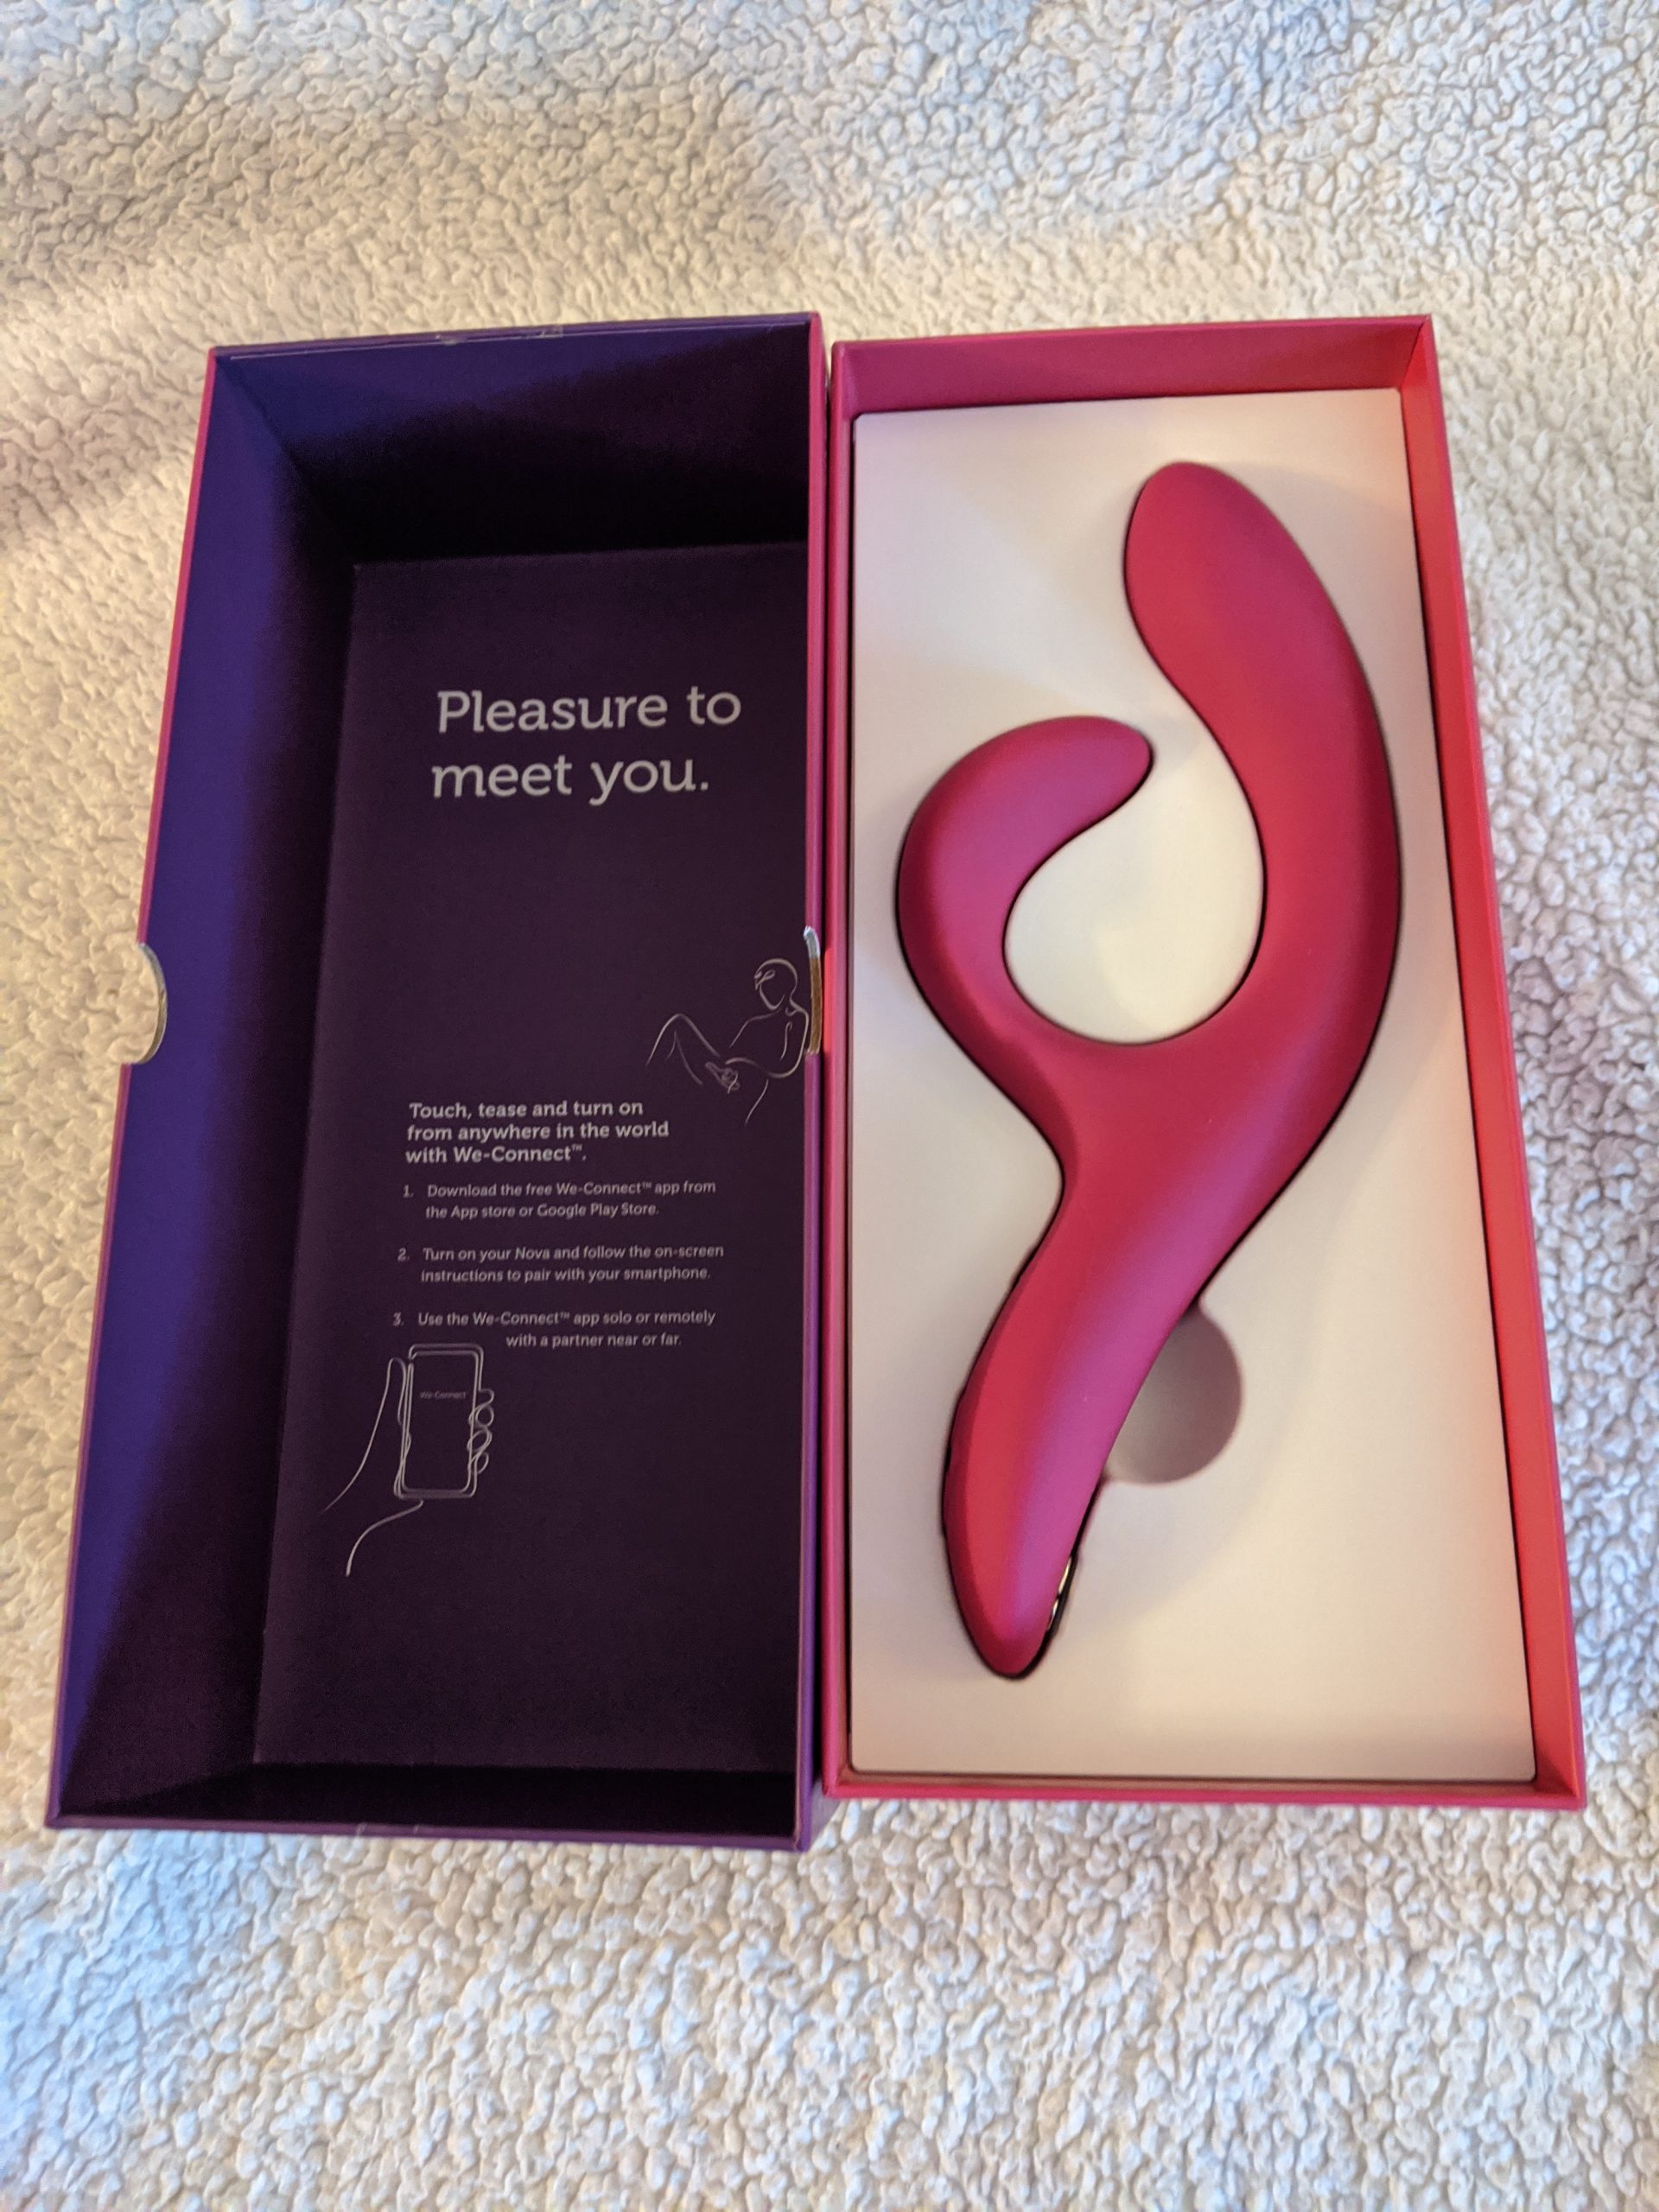 Some Ideas on [Toy Review] We-vibe X Lovehoney Remote Control Couple's ... You Need To Know